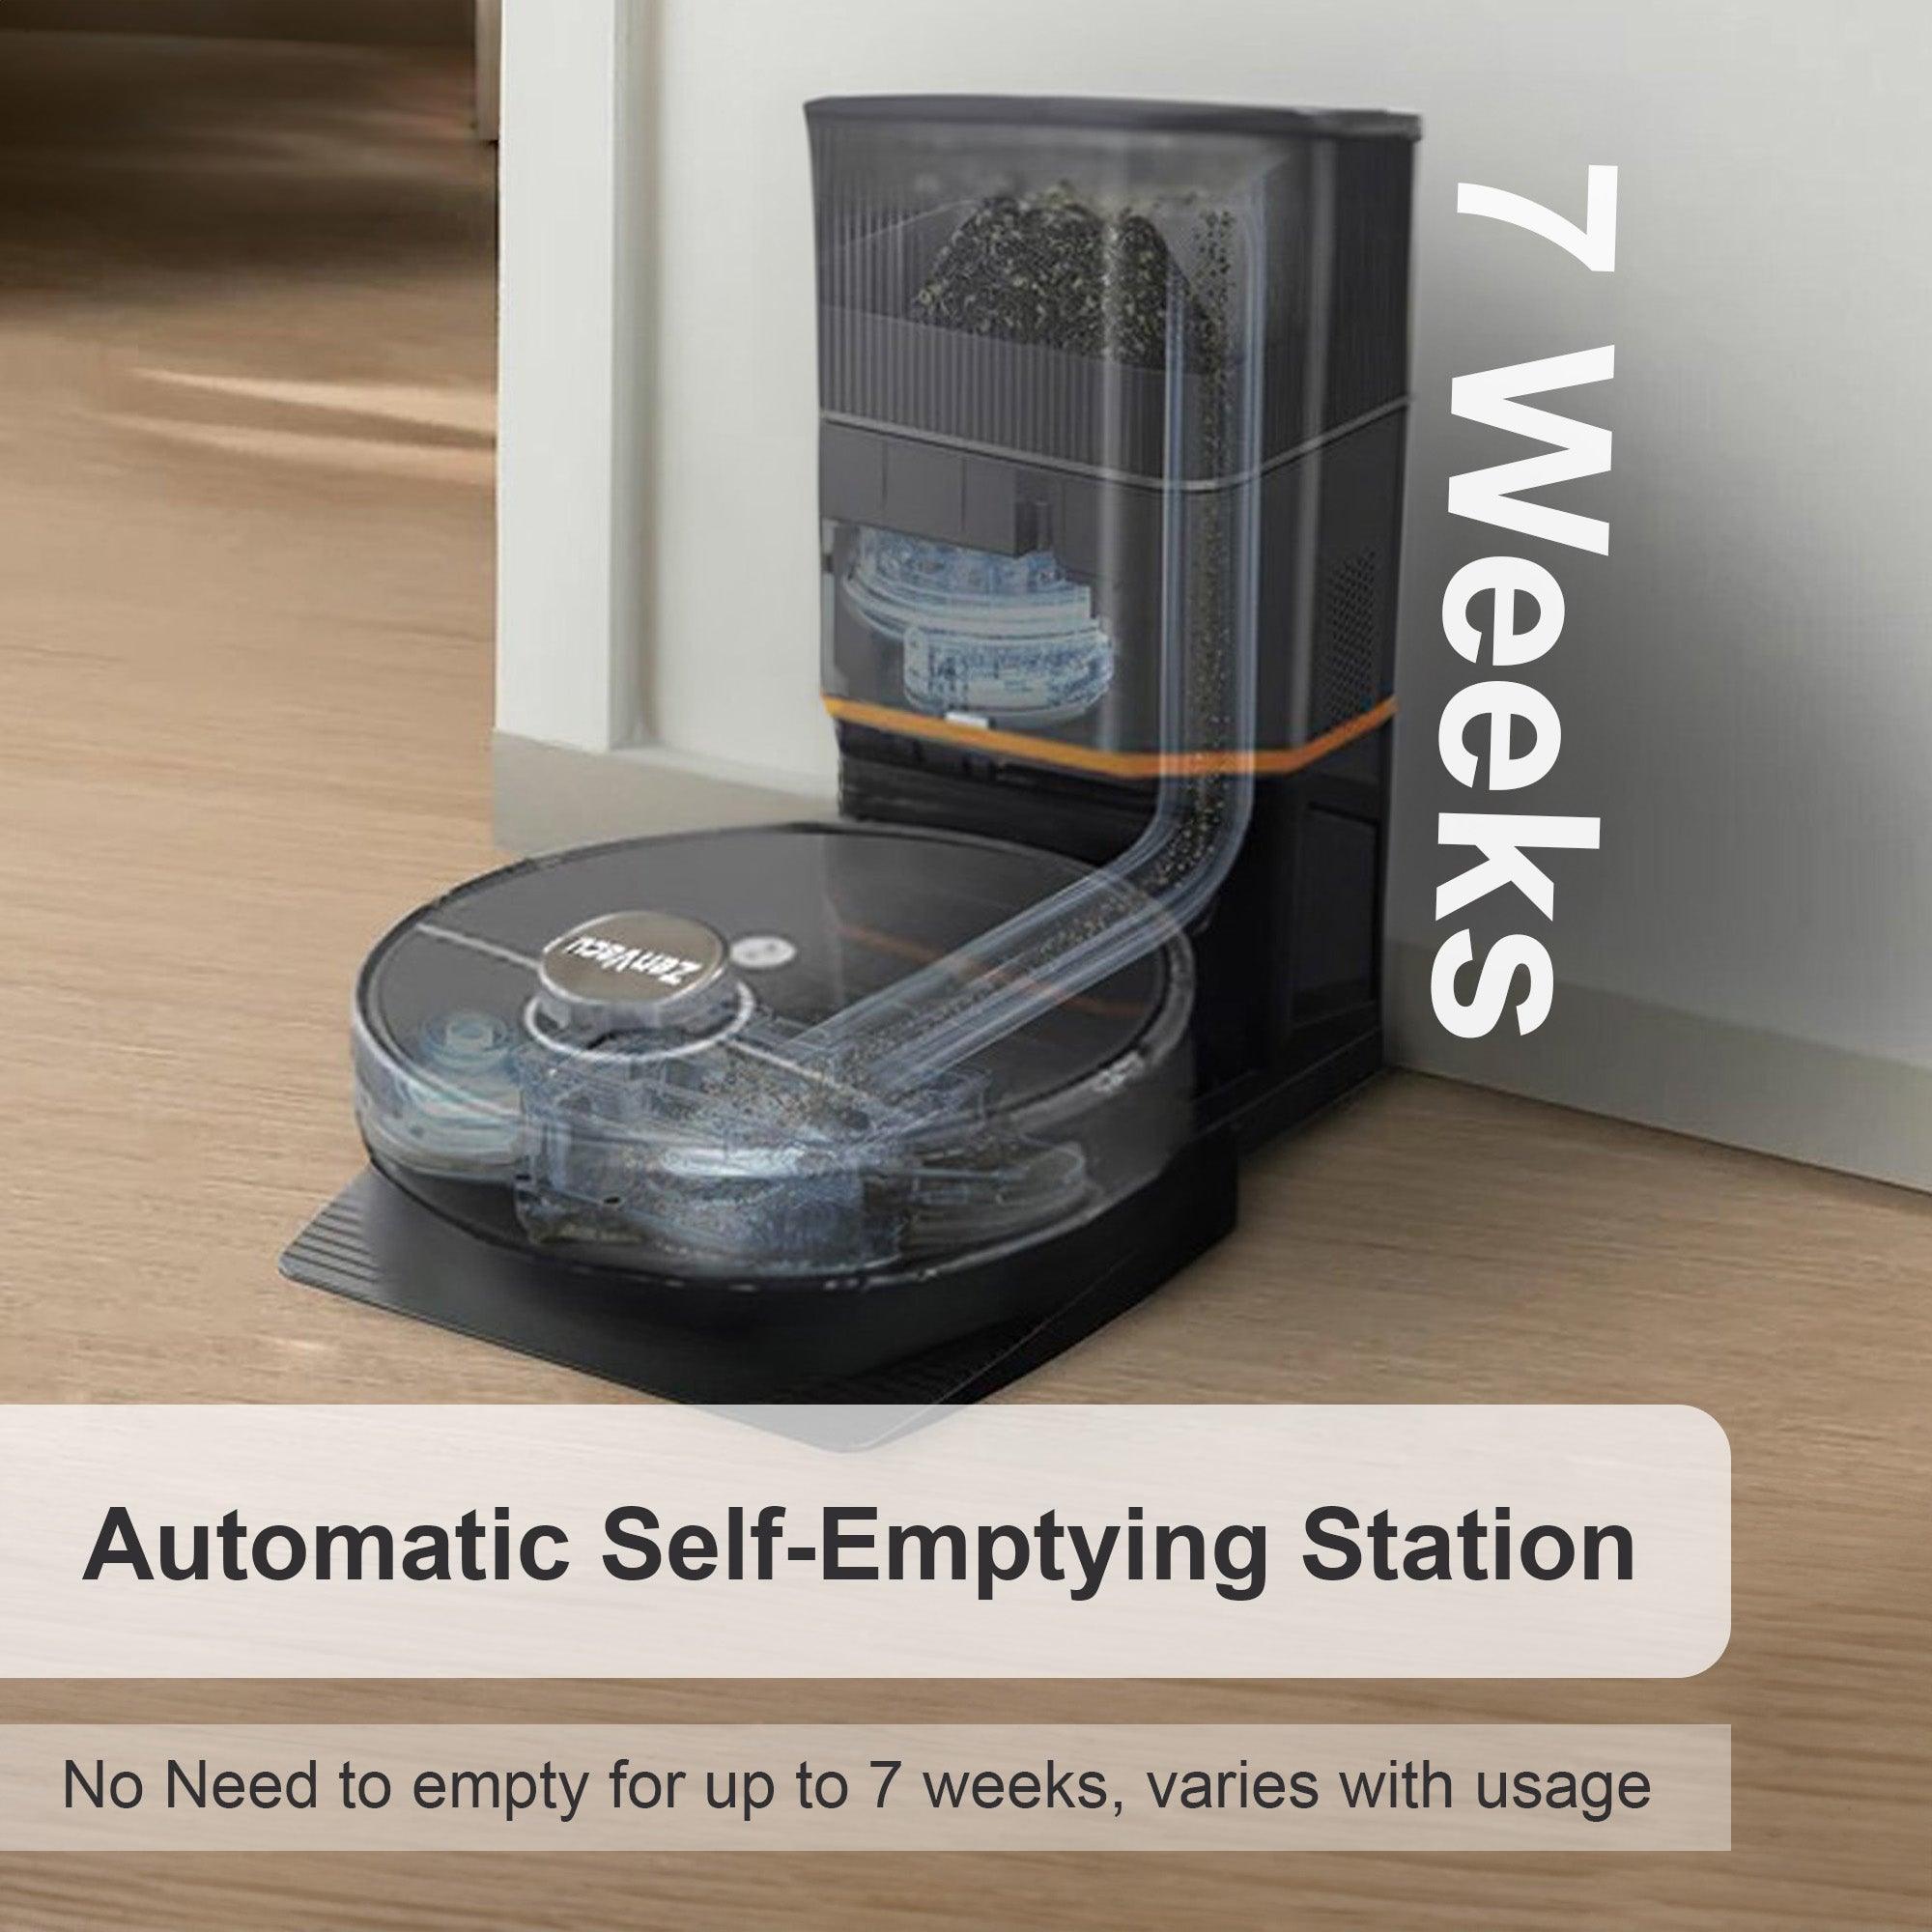 The ZenVacu robot cleaner ZV G8 Pro has a self emptying station. with a dust bag of 3 Liters. Automatic Self-Emptying Station. No need to empty for up to 7 weeks, waries with usage.